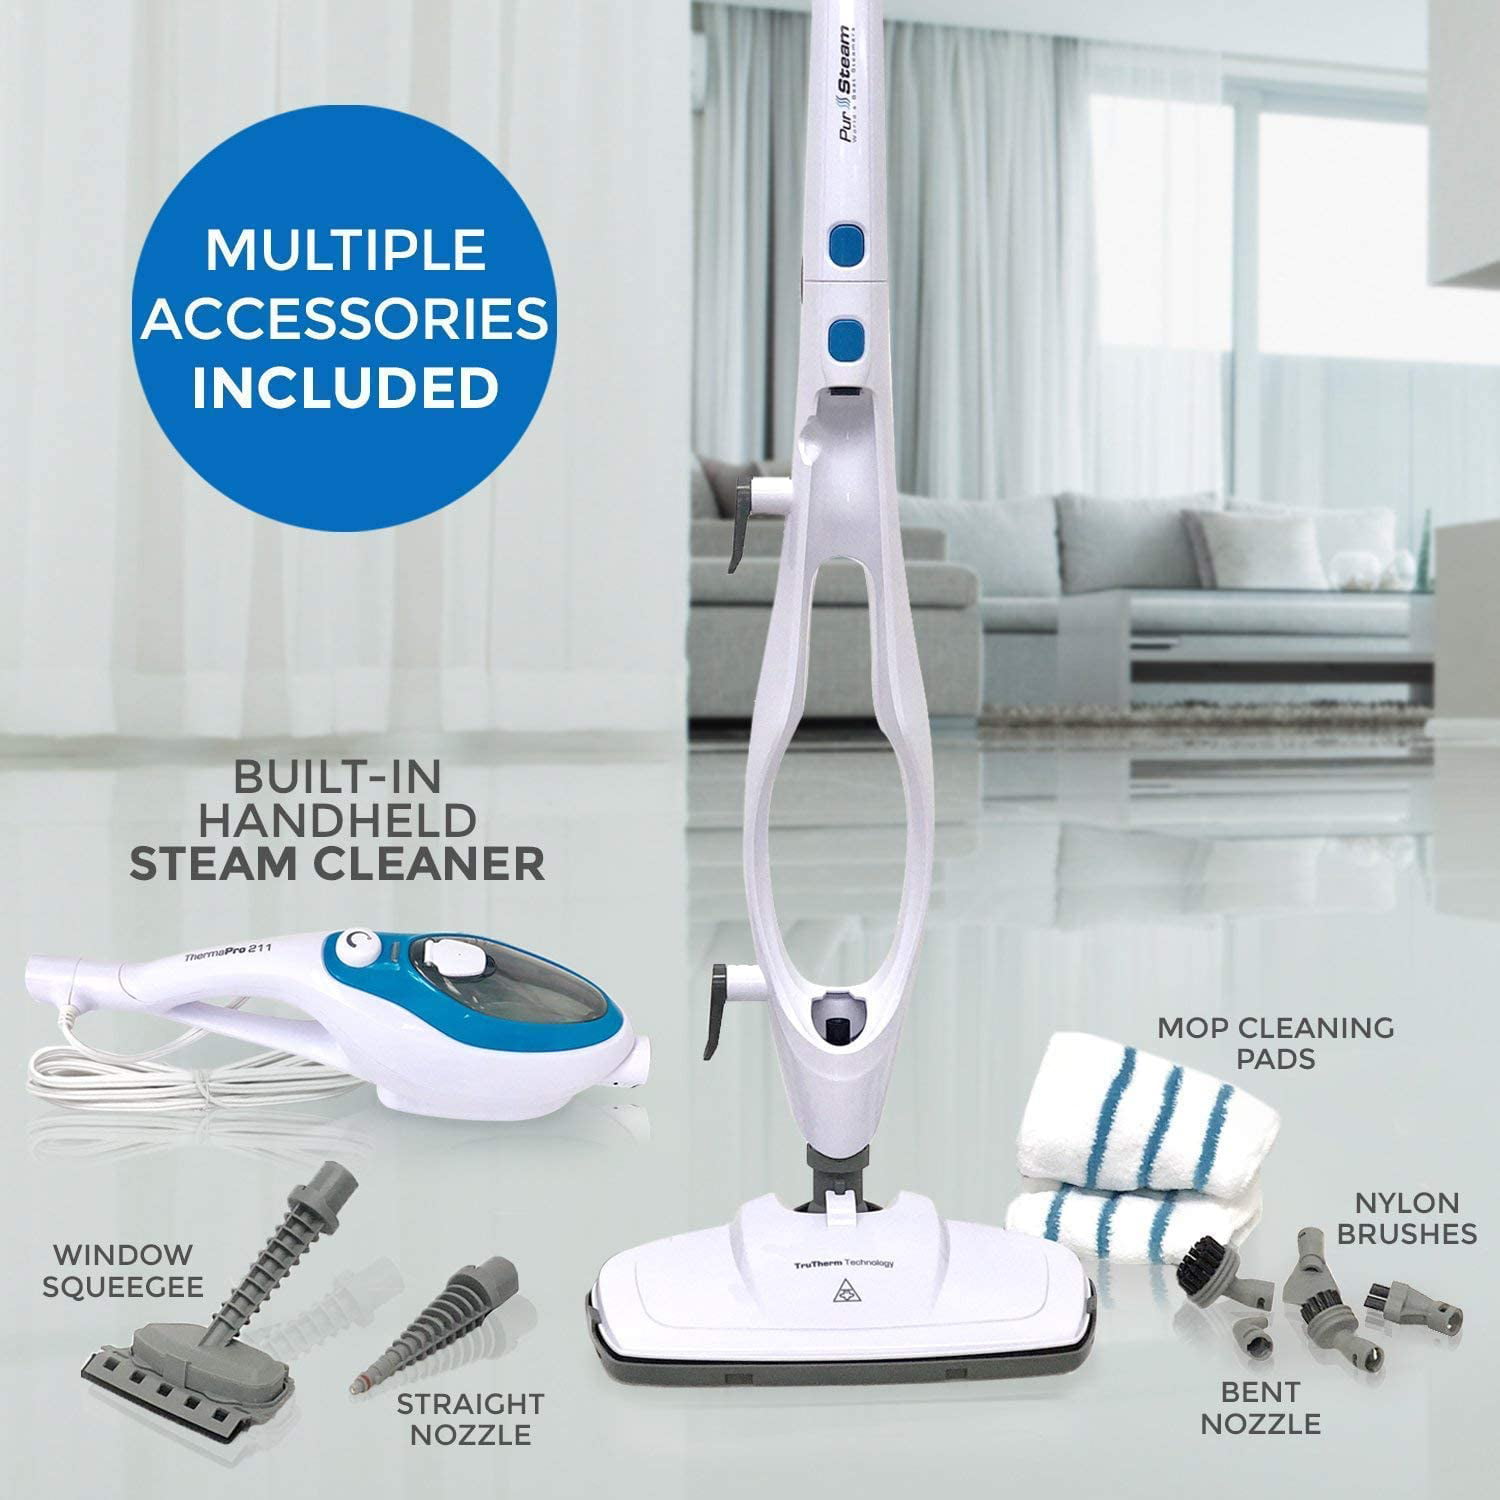 PurSteam Therma Pro 211 Mop Cleaner Instructions Manual